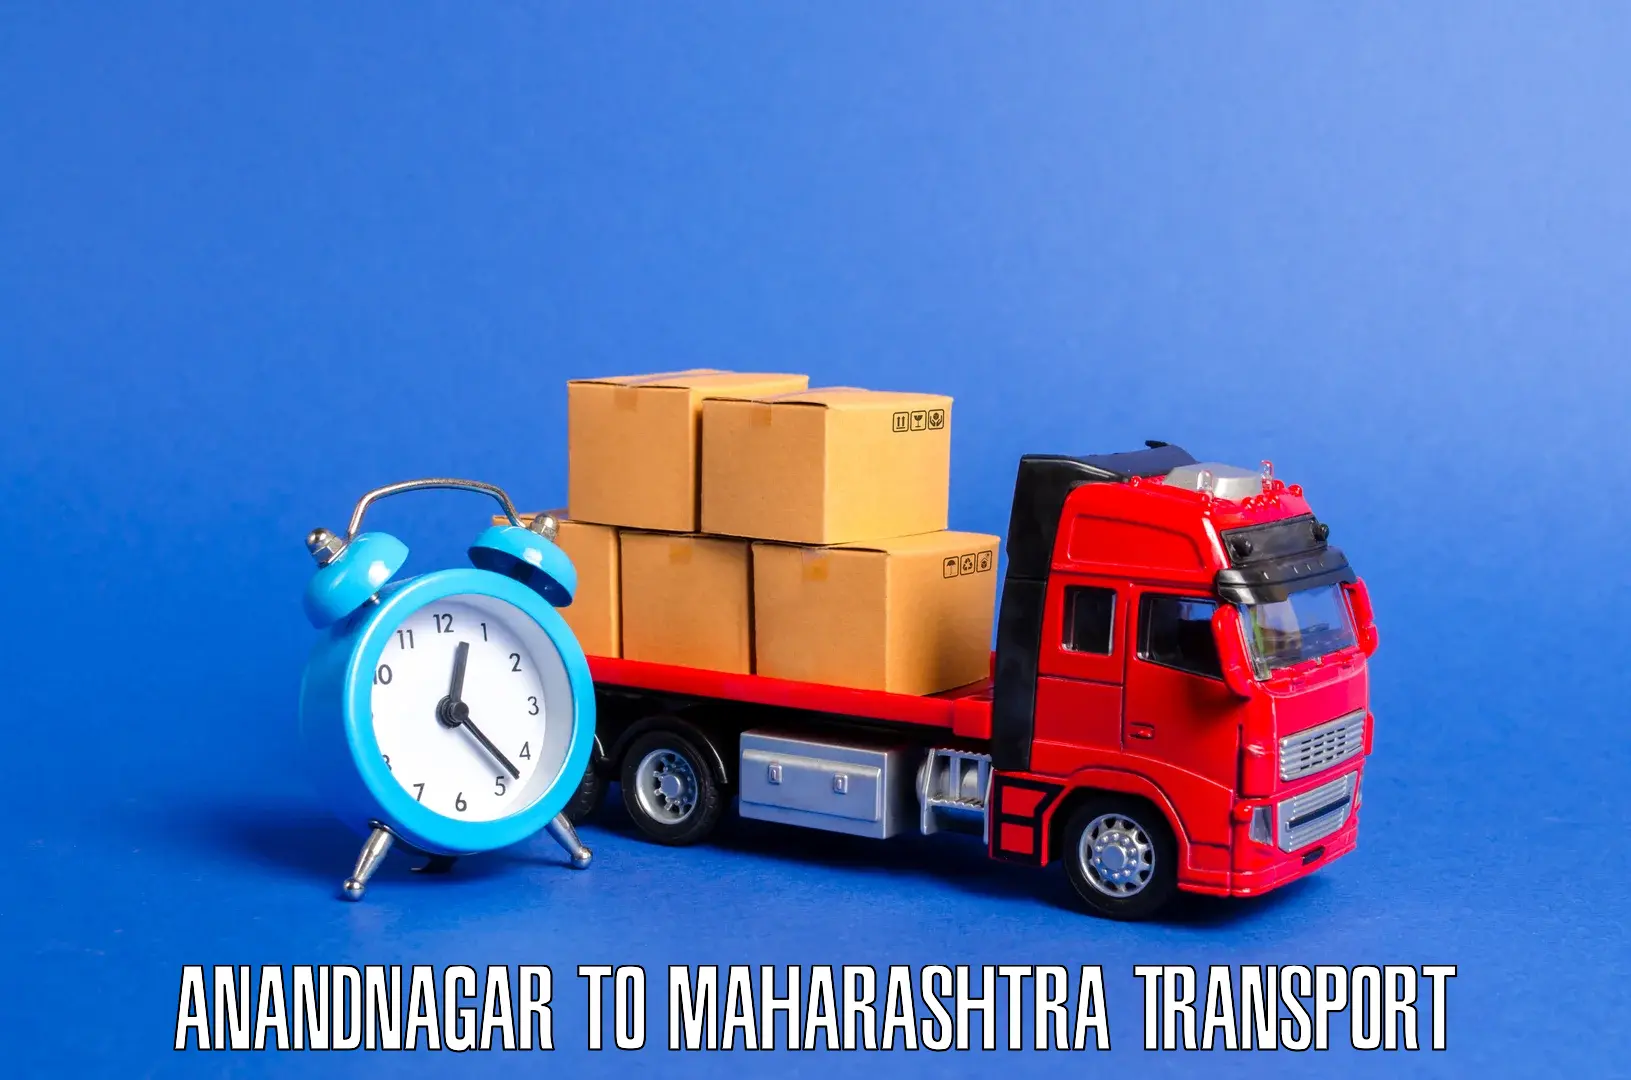 Vehicle transport services in Anandnagar to Baramati